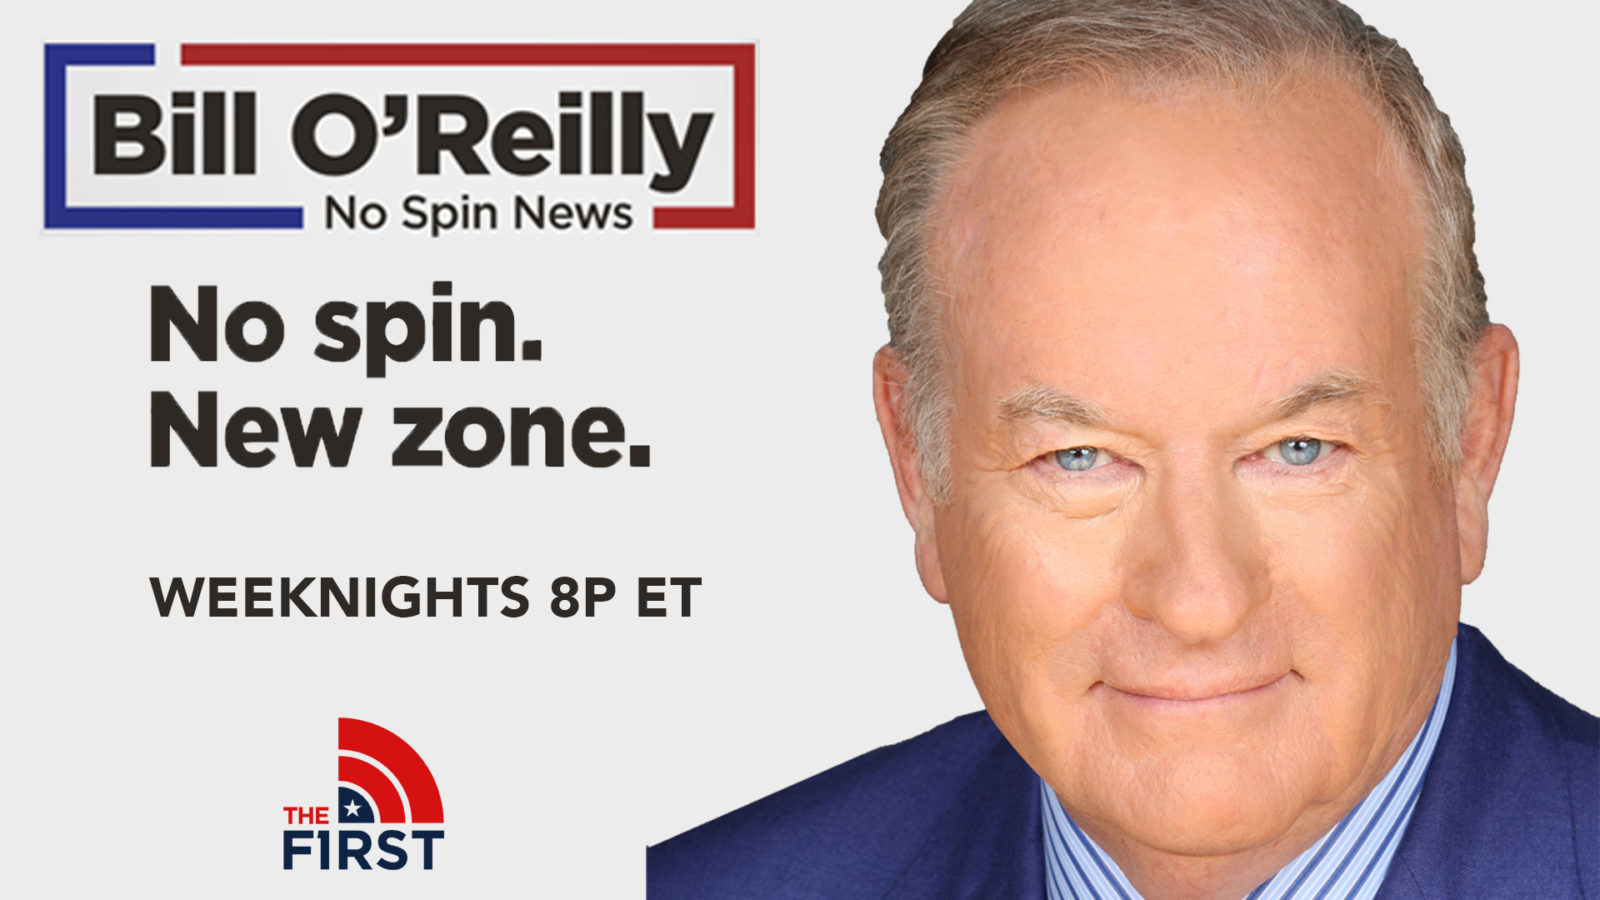 Bill O’Reilly joins The First and returns to free TV! The First TV